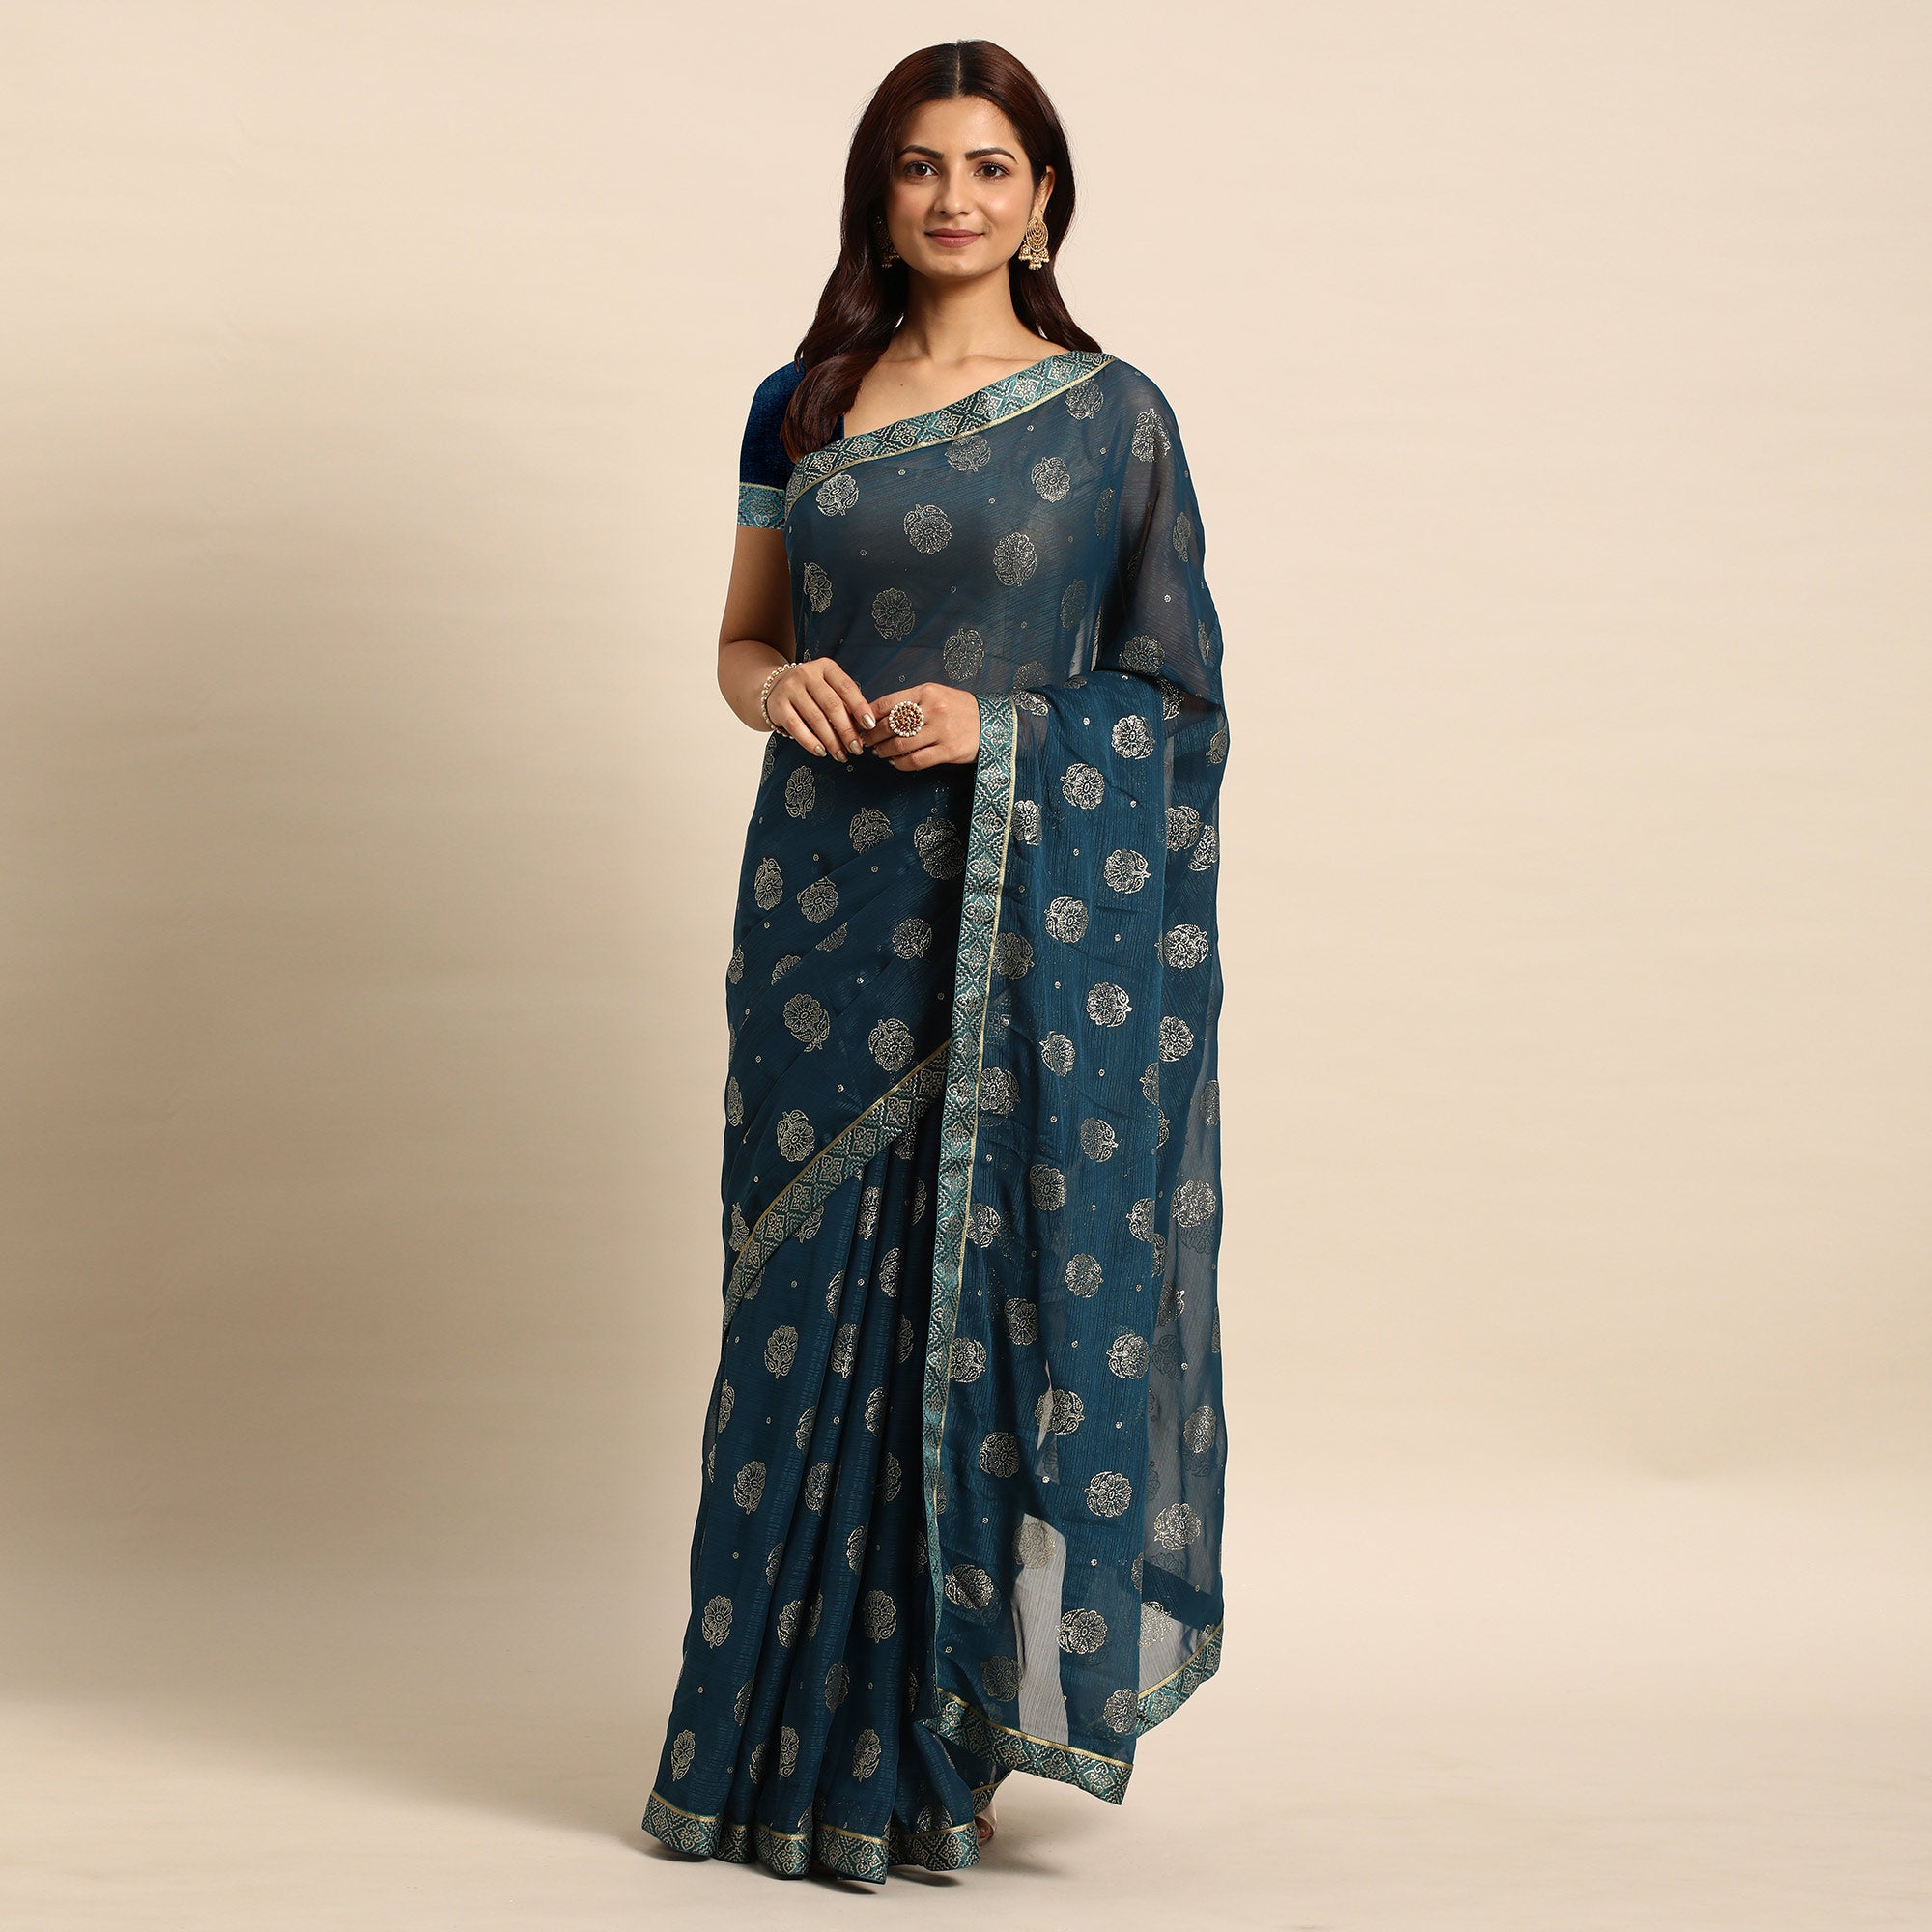 Teal Blue Foil Printed With Embellished Chiffon Saree